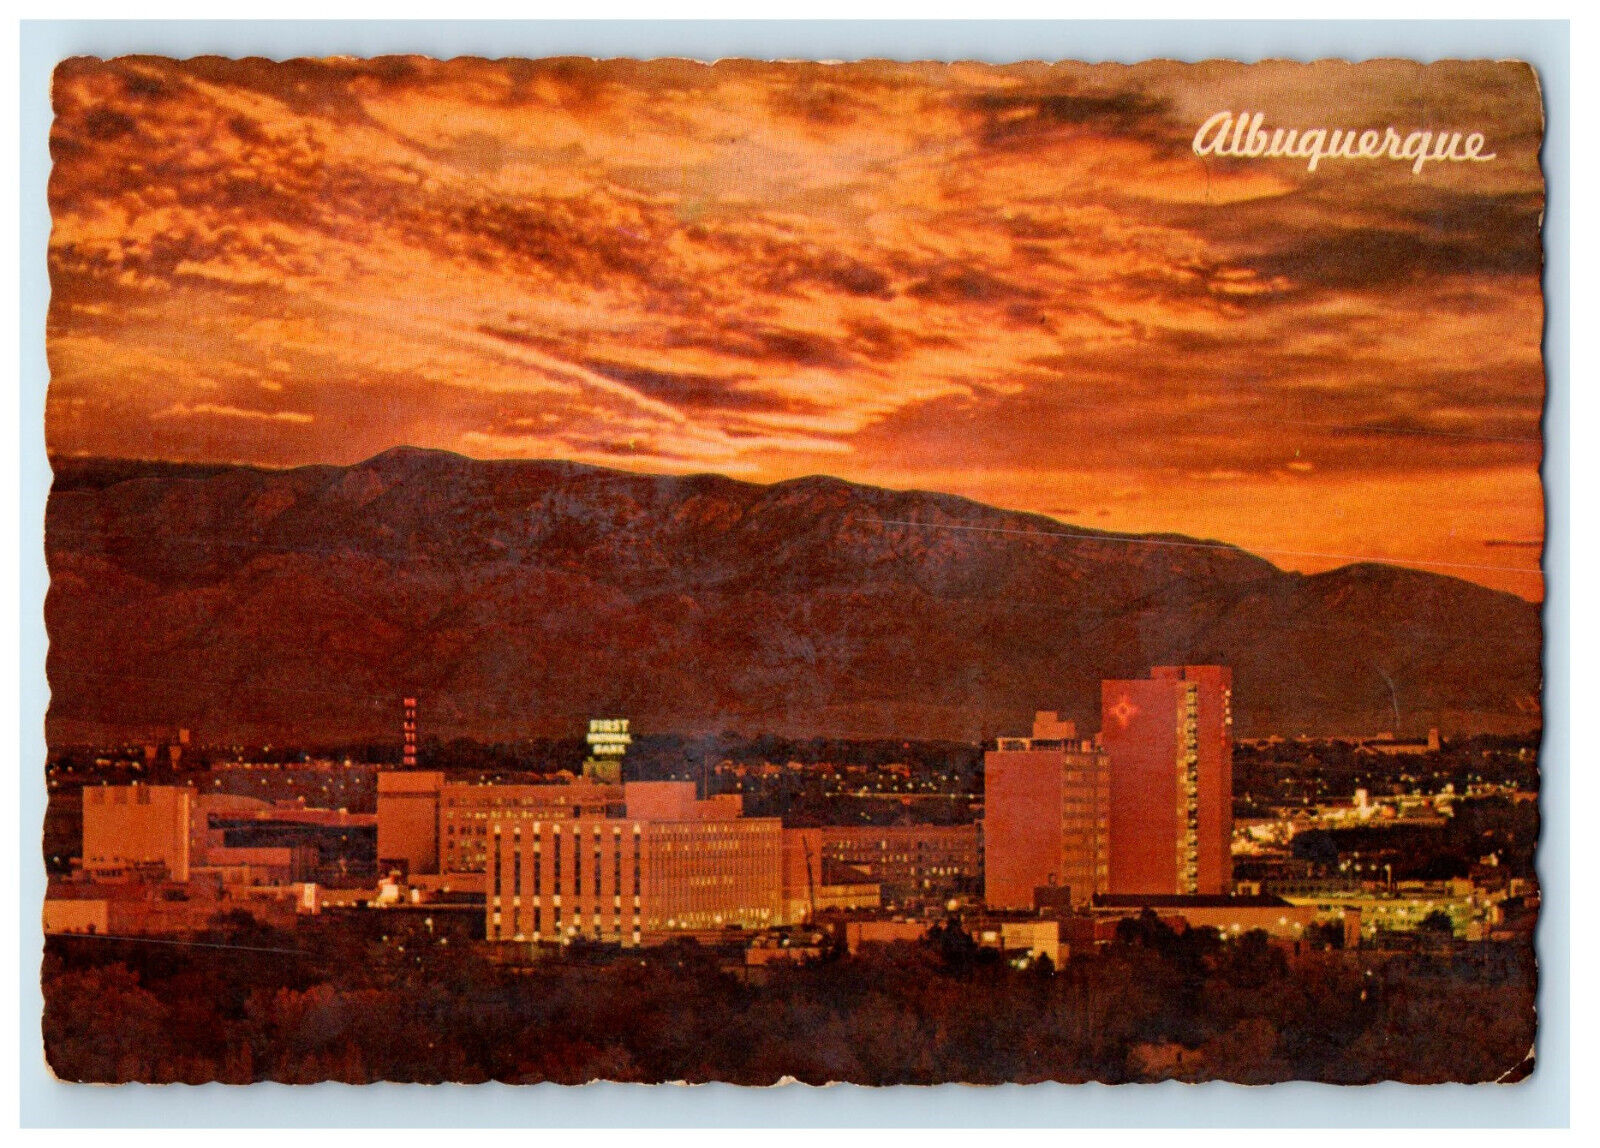 c1950's Night Falls Over This Largest City in New Mexico Albuquerque NM Postcard